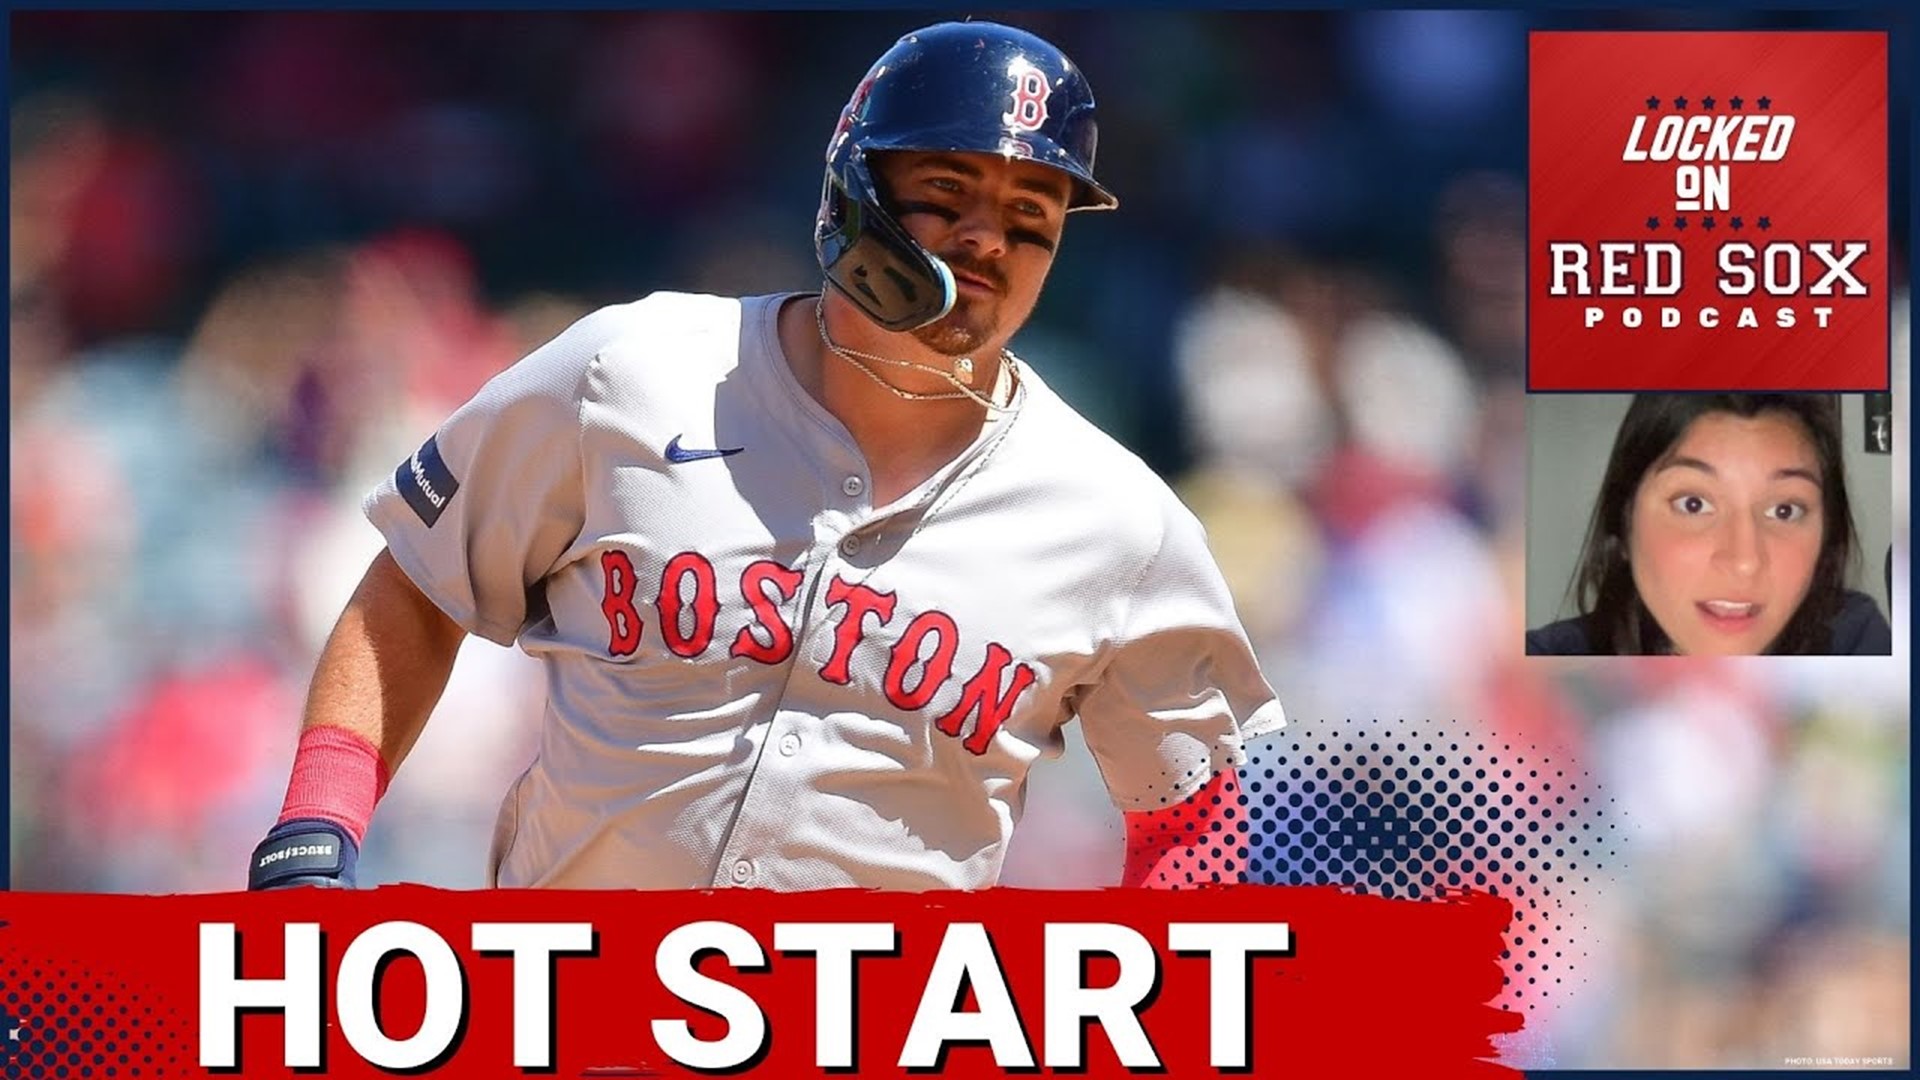 Reese McGuire is off to a hot start this season for the Boston Red Sox so far.